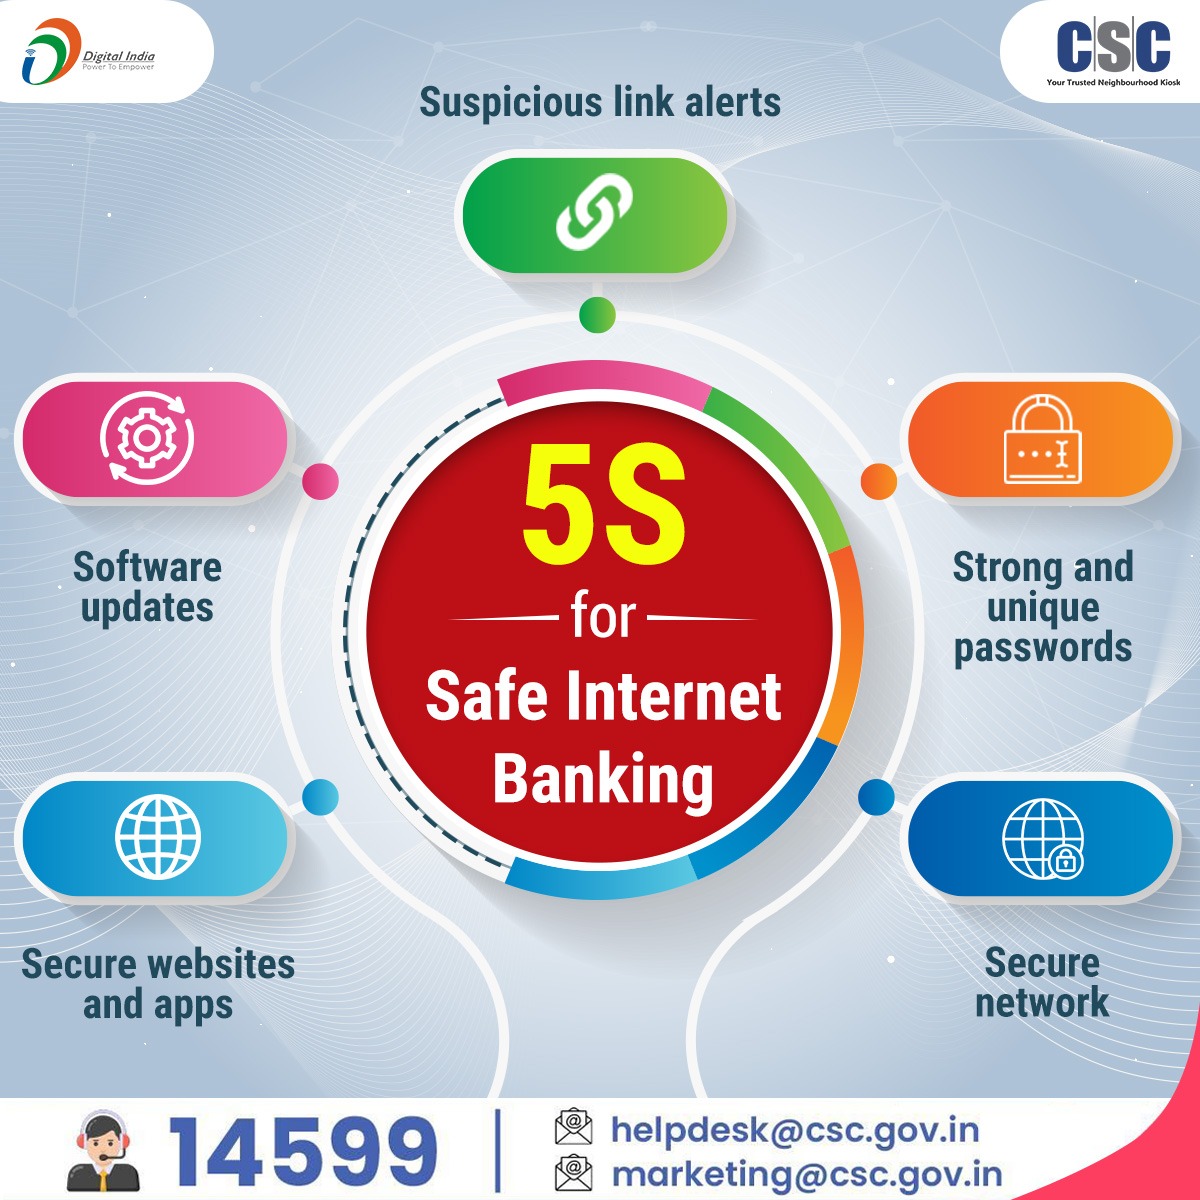 VLEs beware of fraudsters...

Here are the 5S for Safe #InternetBanking:

-Suspicious link alerts
-Software updates
-Strong and unique passwords
-Secure websites and apps
-Secure network

For any queries, please call 14599 or write to helpdesk@csc.gov.in or marketing@csc.gov.in